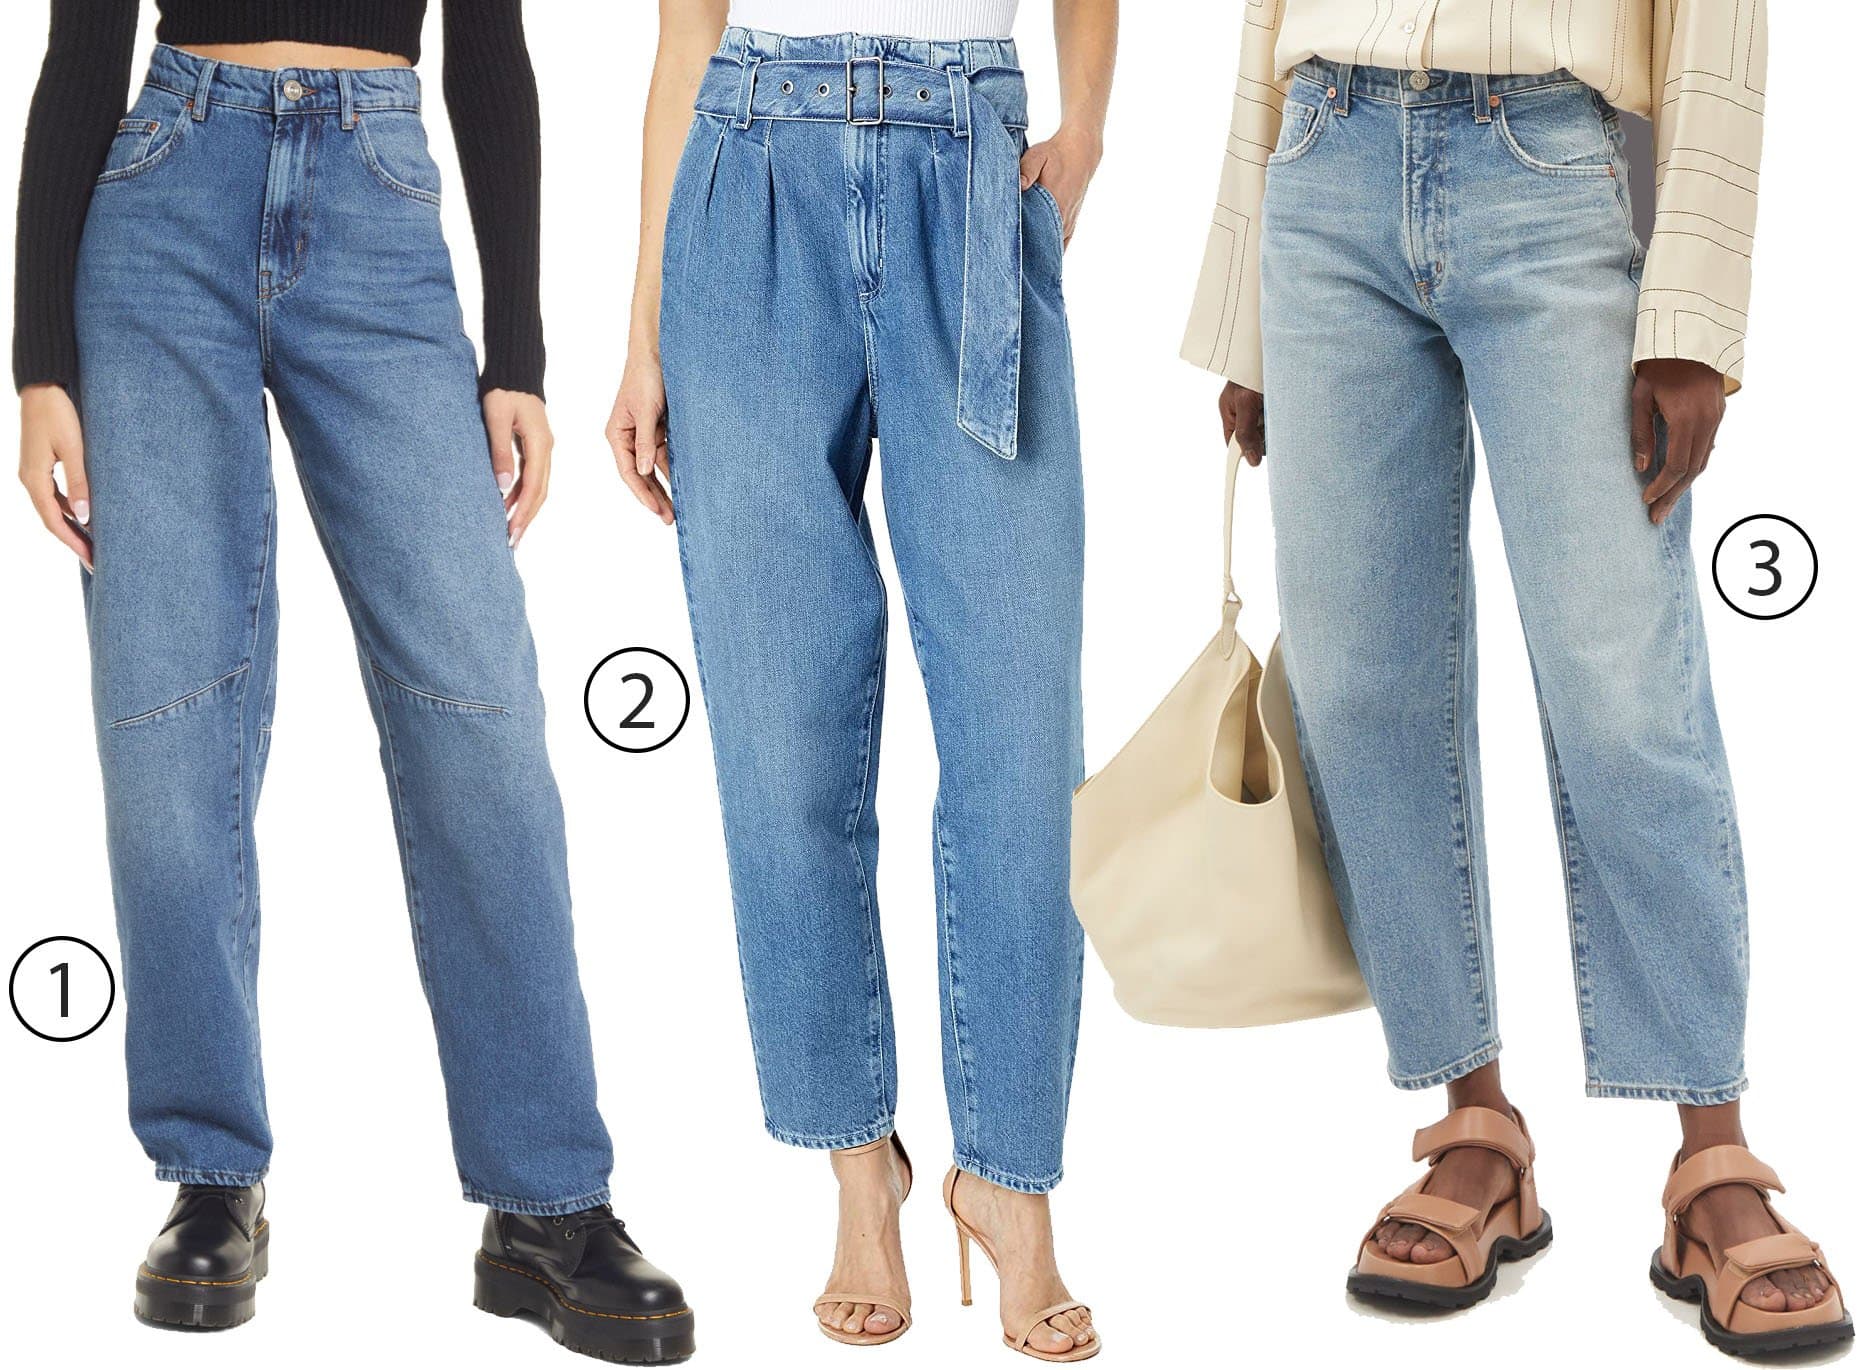 1. BDG Urban Outfitters Logan Barrel-Leg Jeans 2. AG Adriano Goldschmied Renn High-Rise Barrel Jeans 3. Citizens of Humanity Calista Cropped Barrel-Leg Jeans